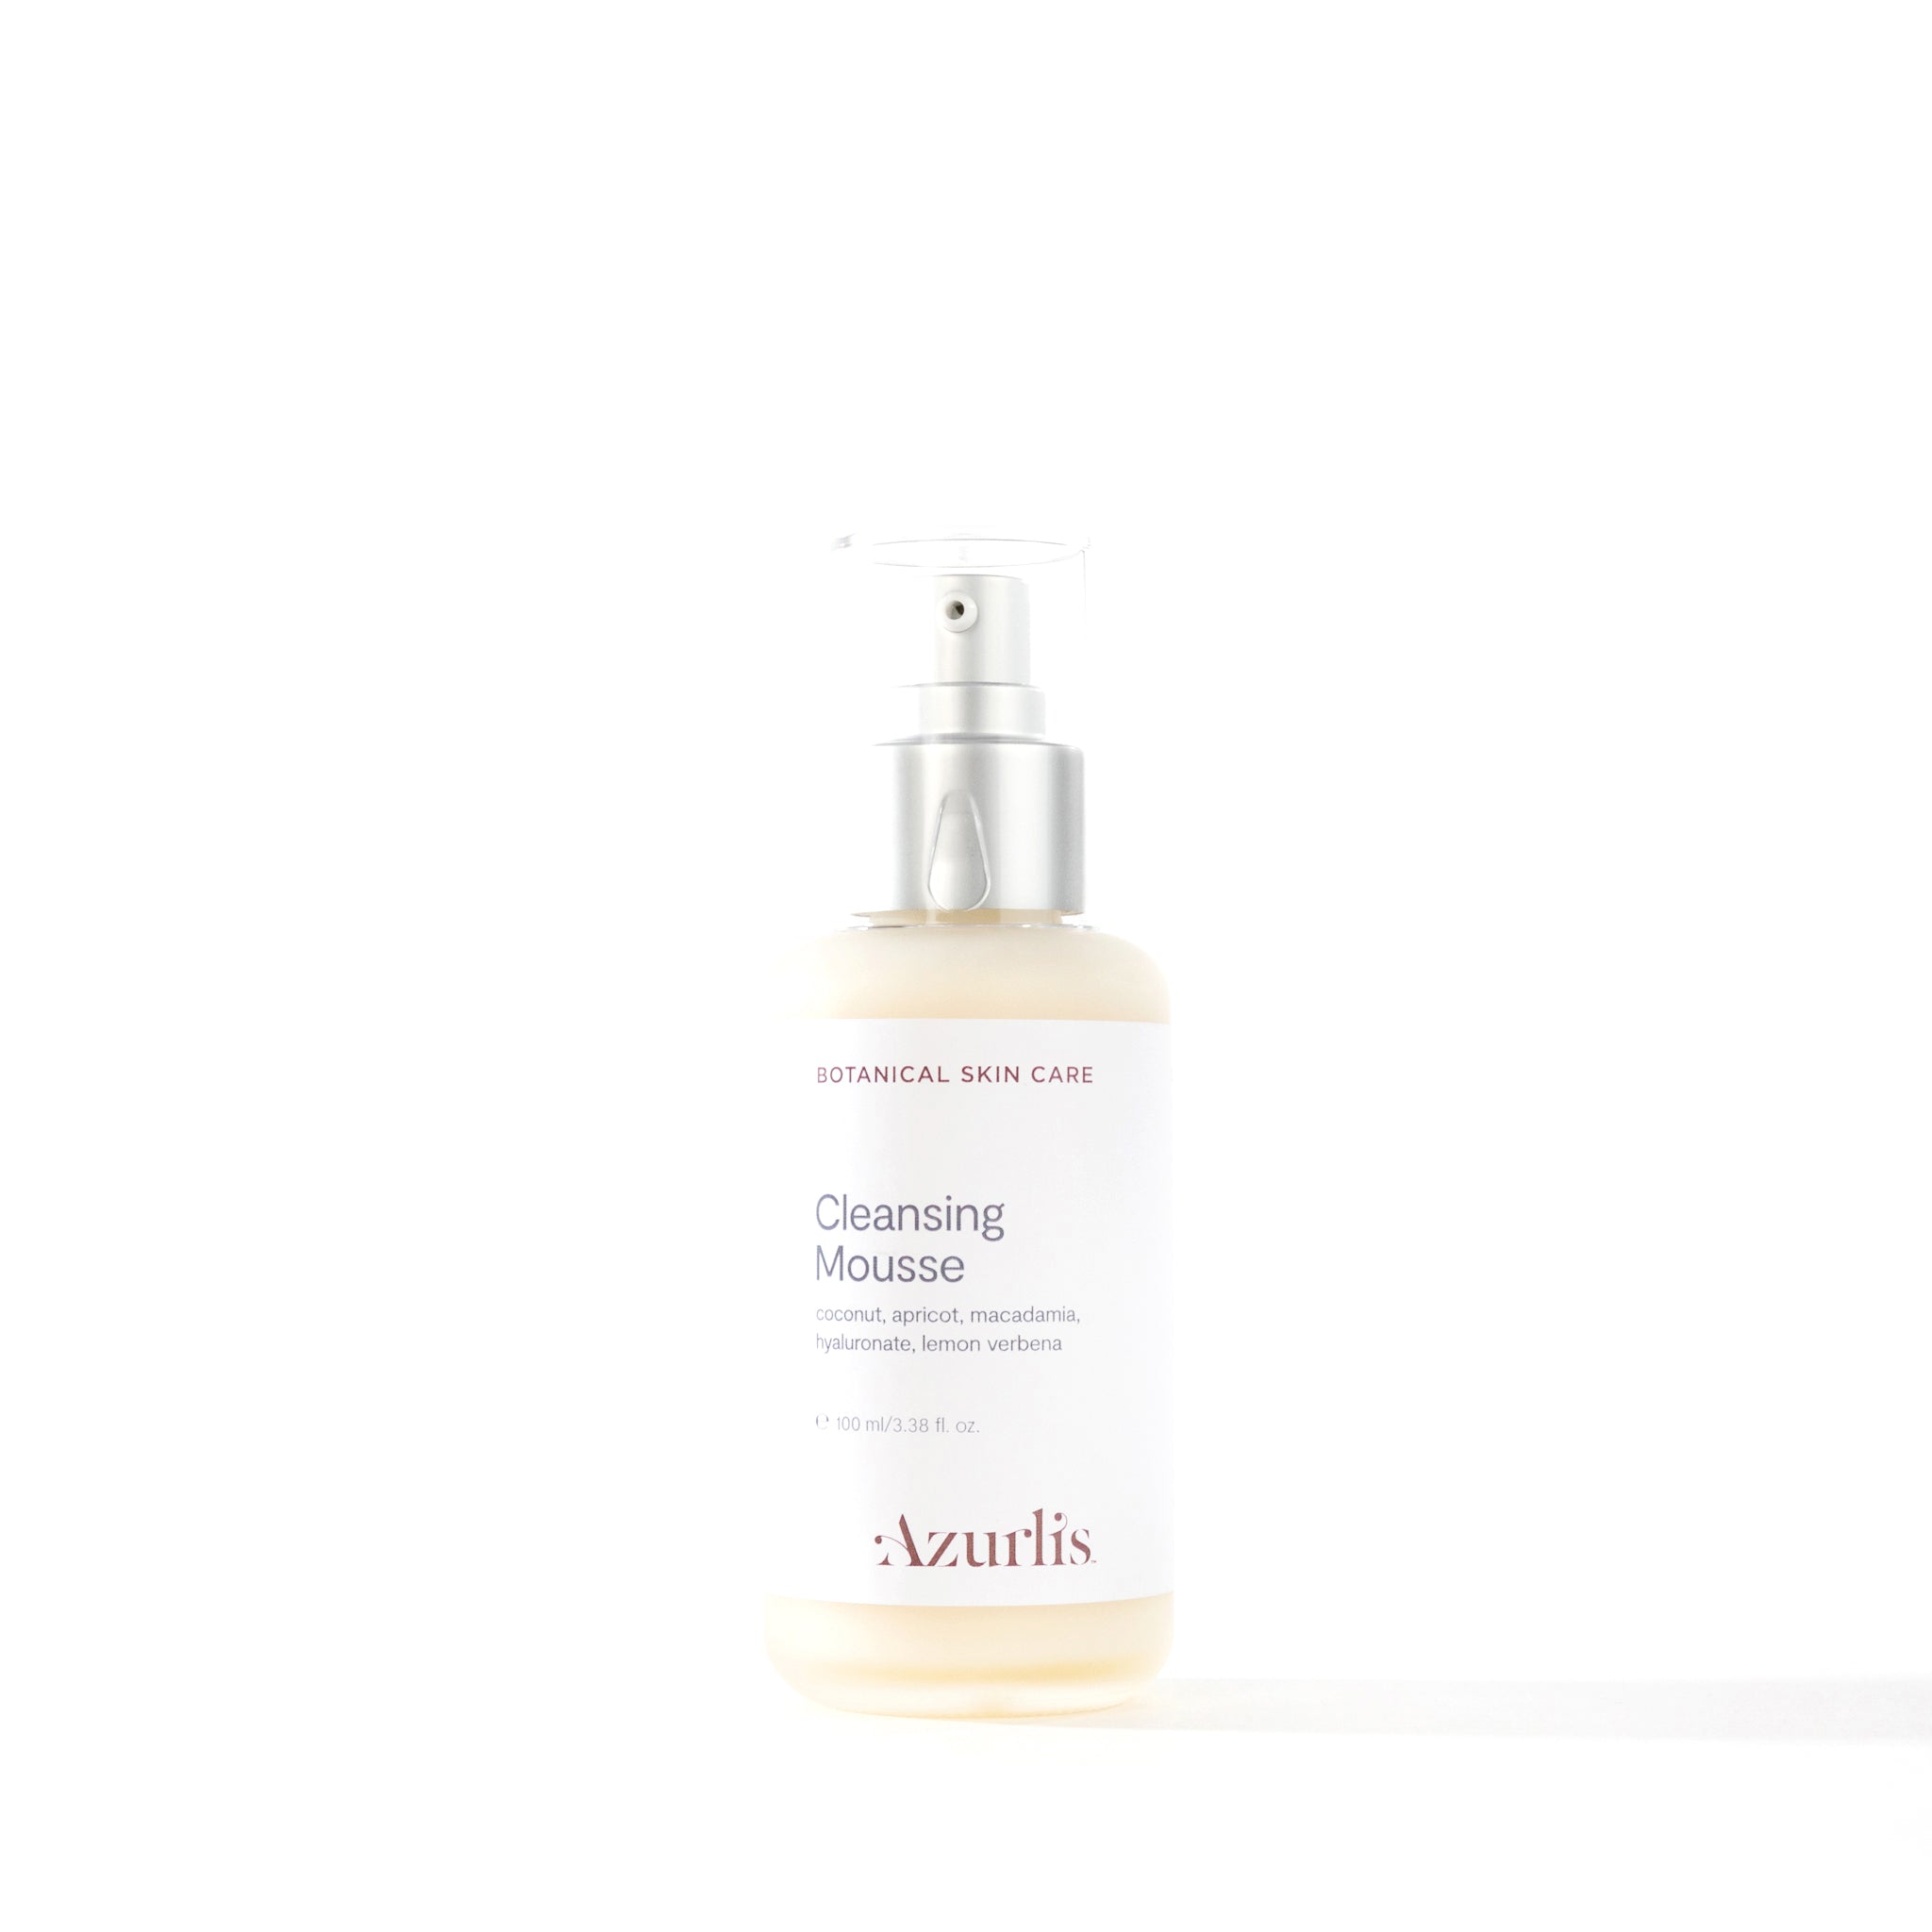 Azurlis™ Cleansing Mousse 100ml is a fantastic cleanser. Combining the benefits of a gentle cream cleanser with a good percentage of natural coconut surfactant and a wonderful scent due to the presence of citrus essential oils.